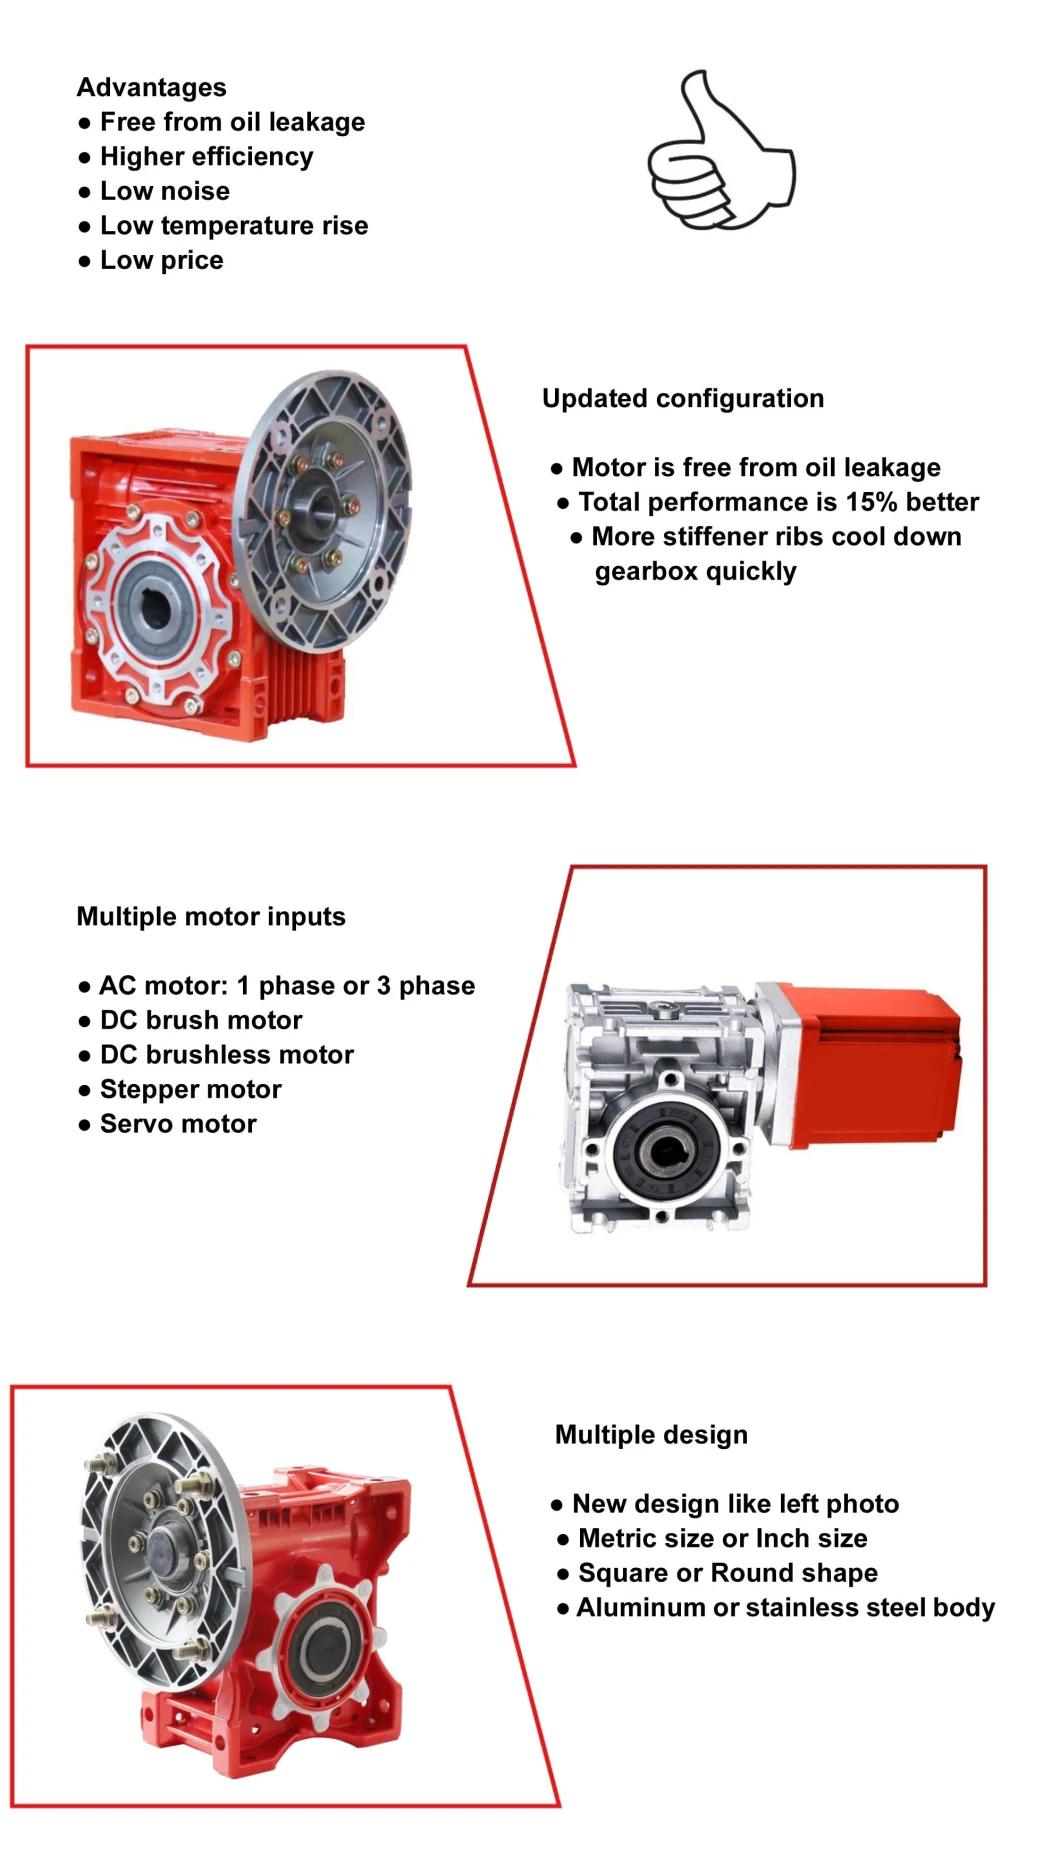 Widely Used High Efficiency Reducktor Gearbox with Best Material